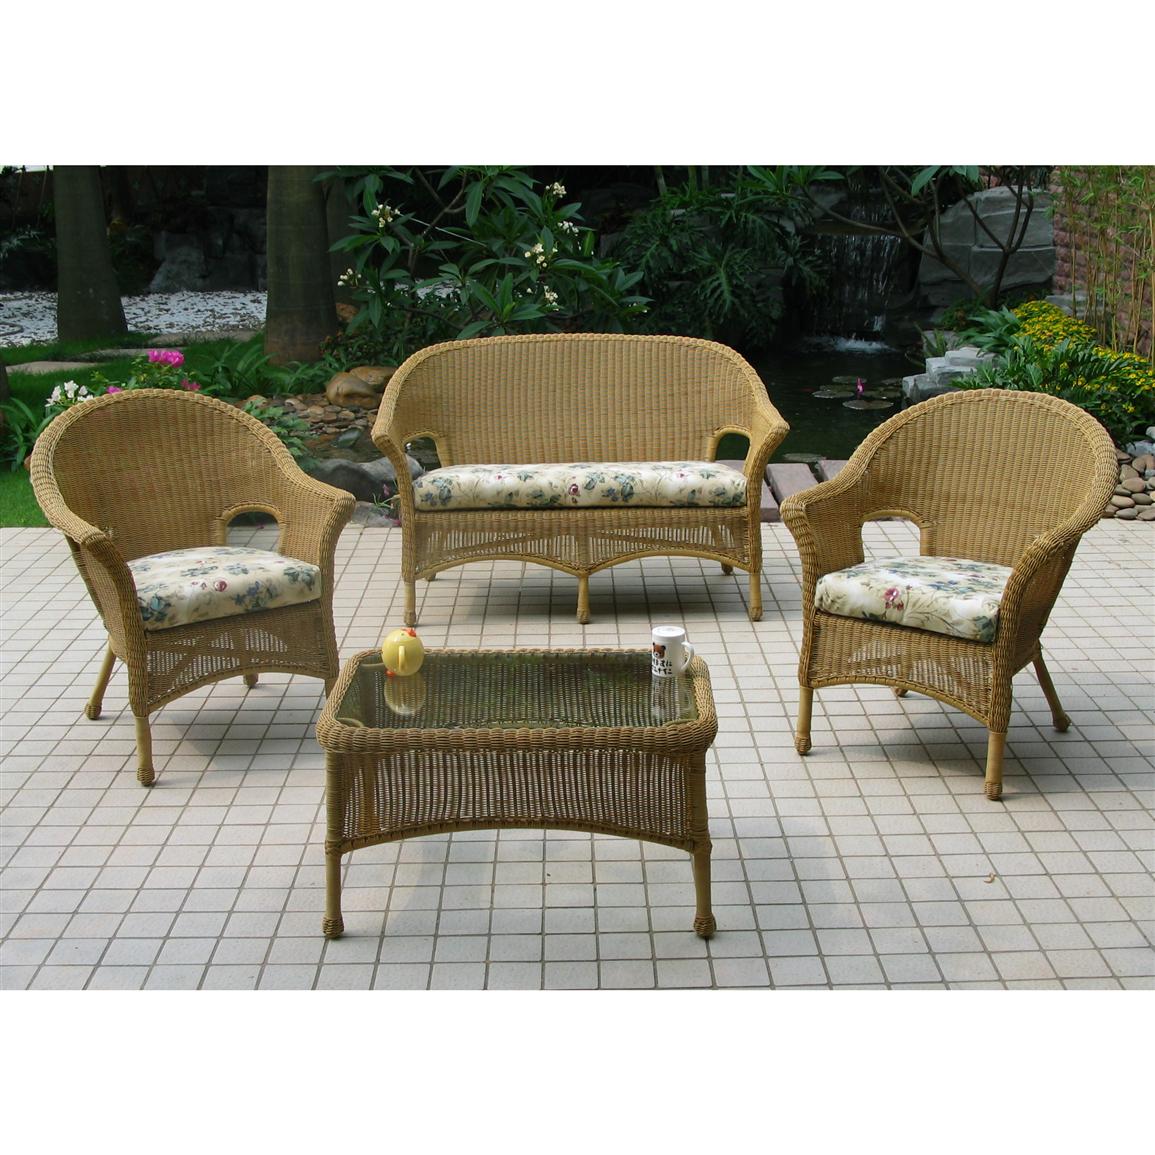 Chicago Wicker 4 Pc Darby Wicker Patio Furniture Collection